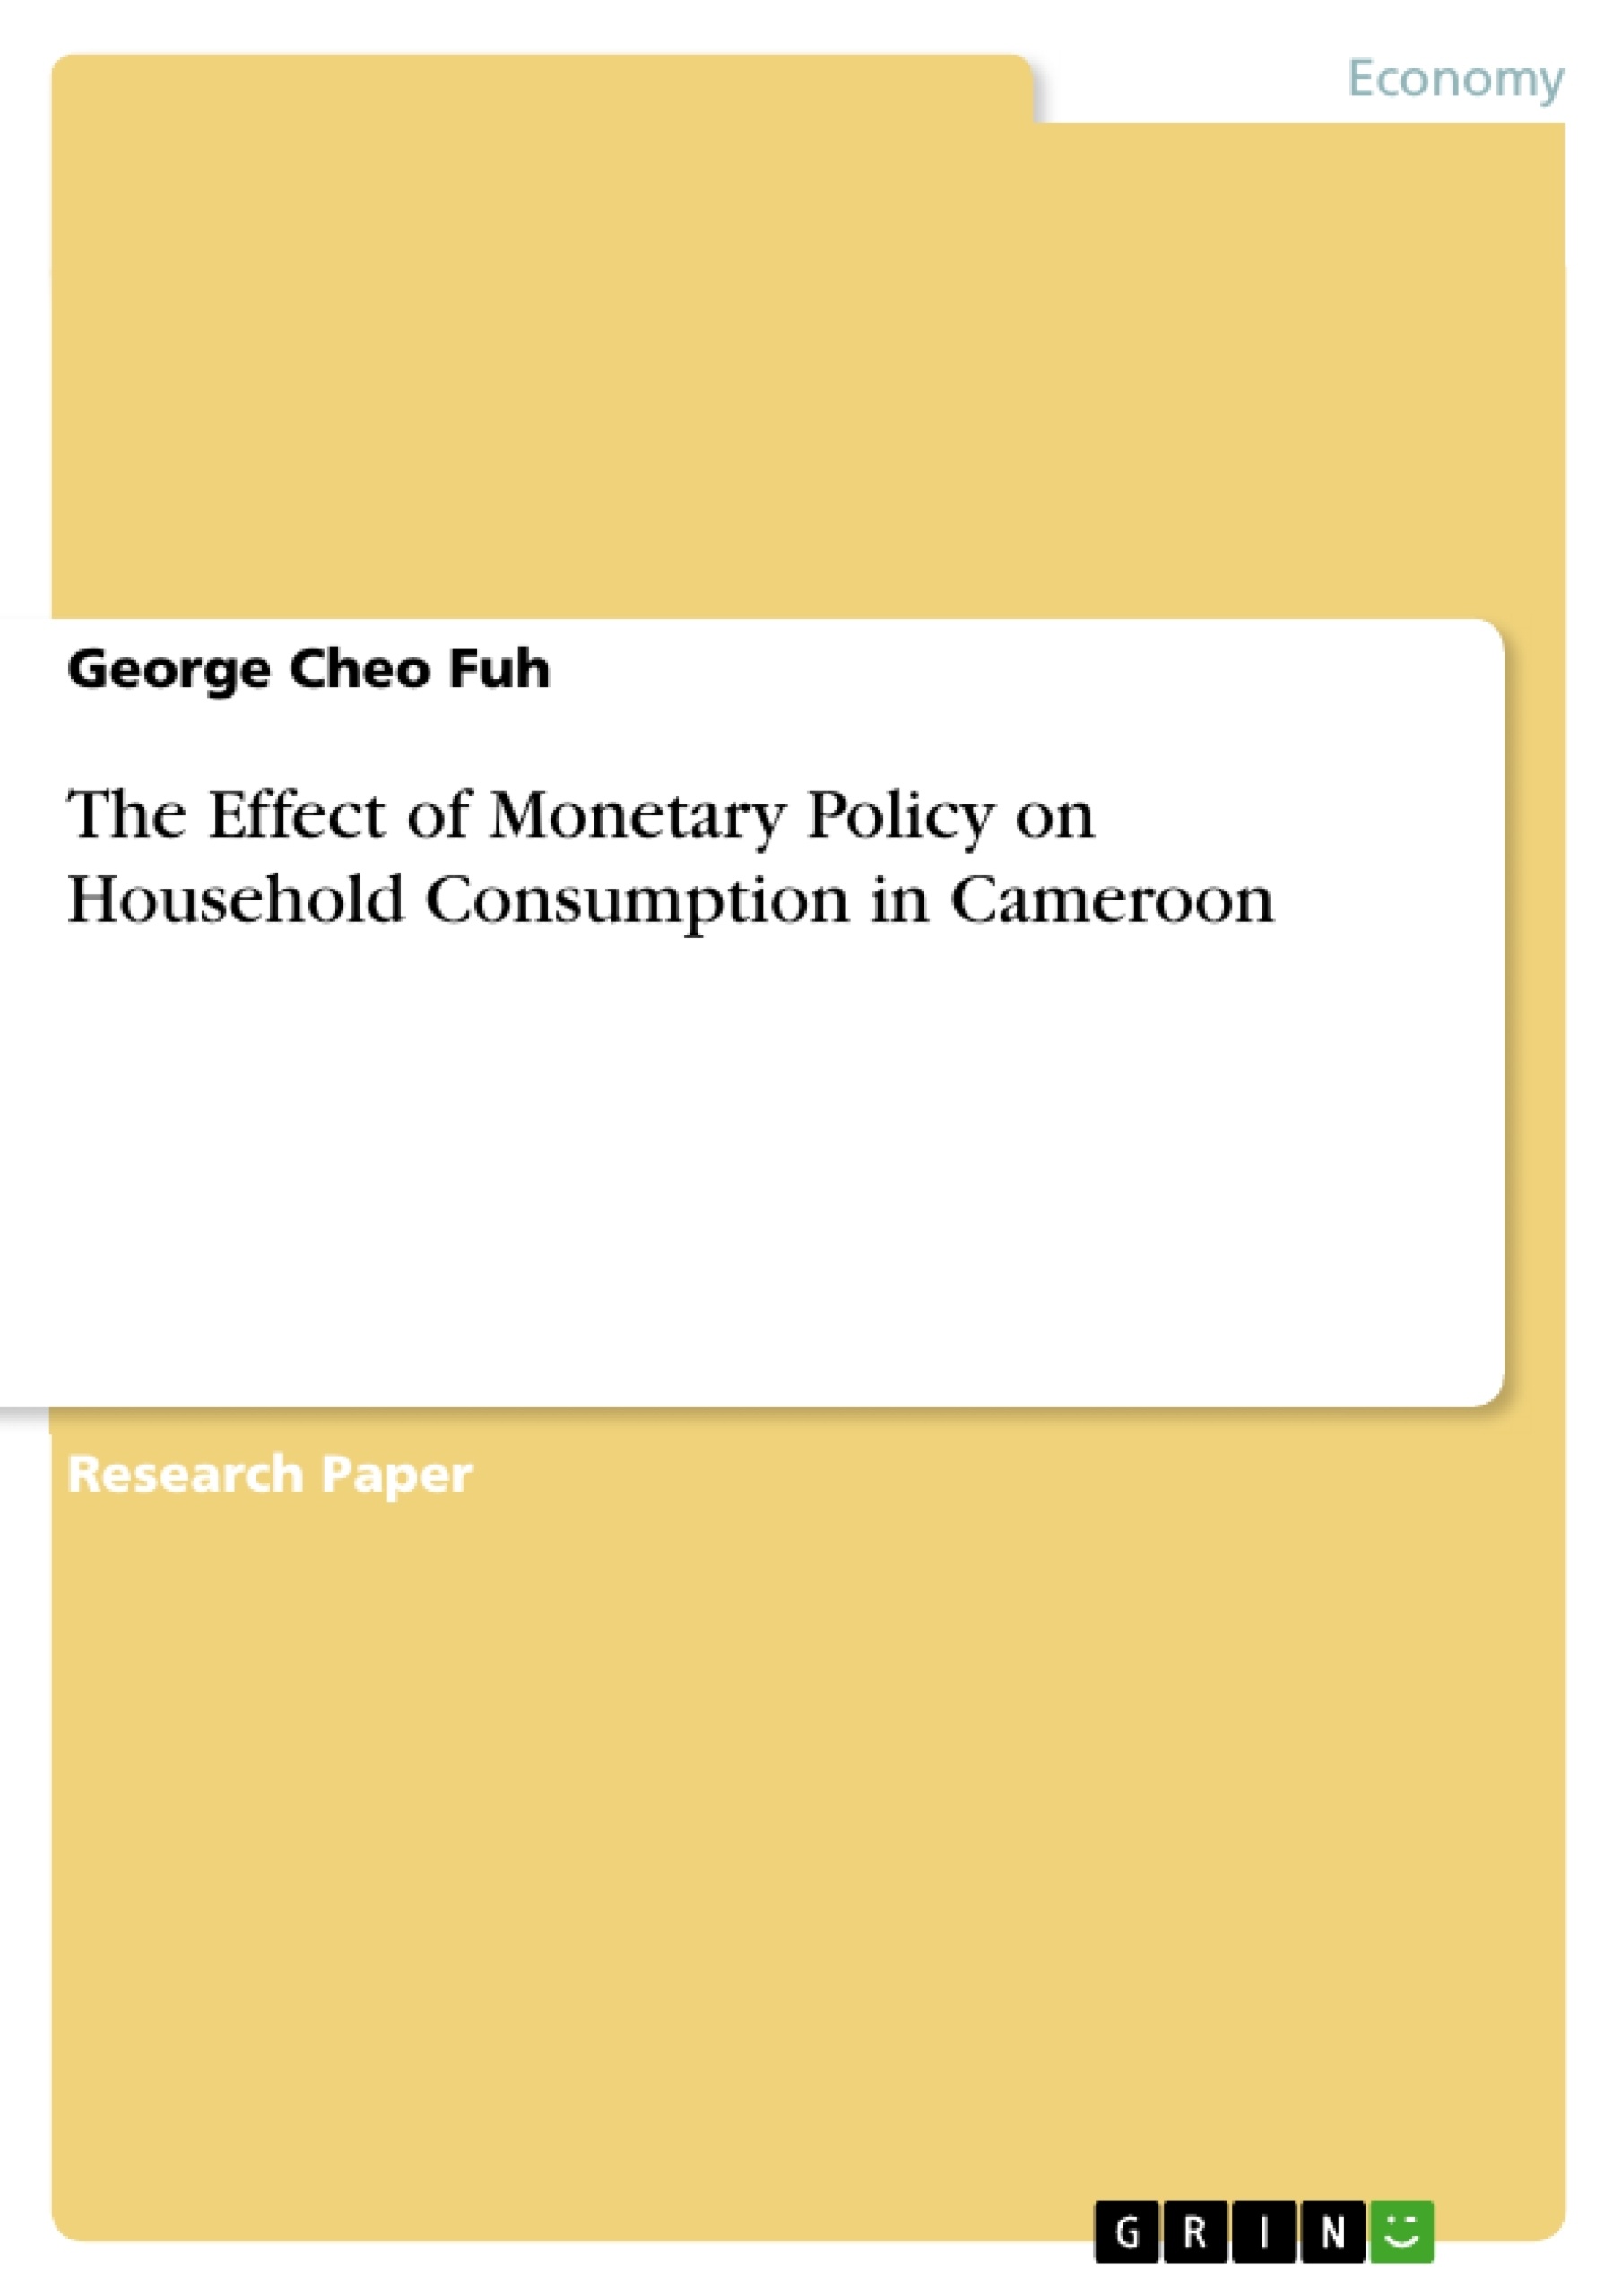 Title: The Effect of Monetary Policy on Household Consumption in Cameroon